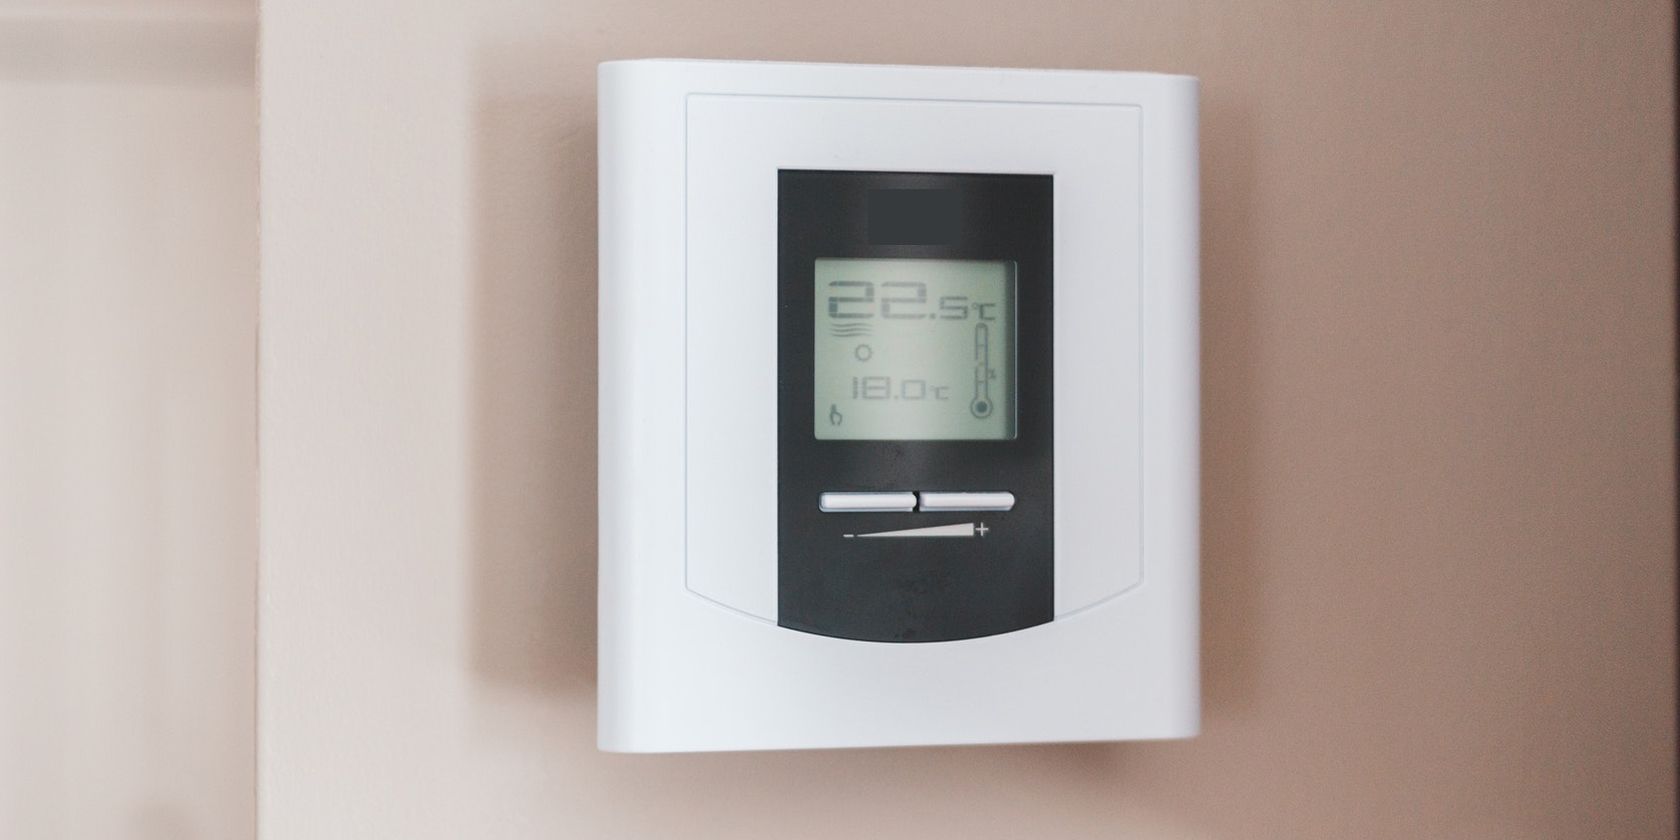 An image showing a generic smart thermostat